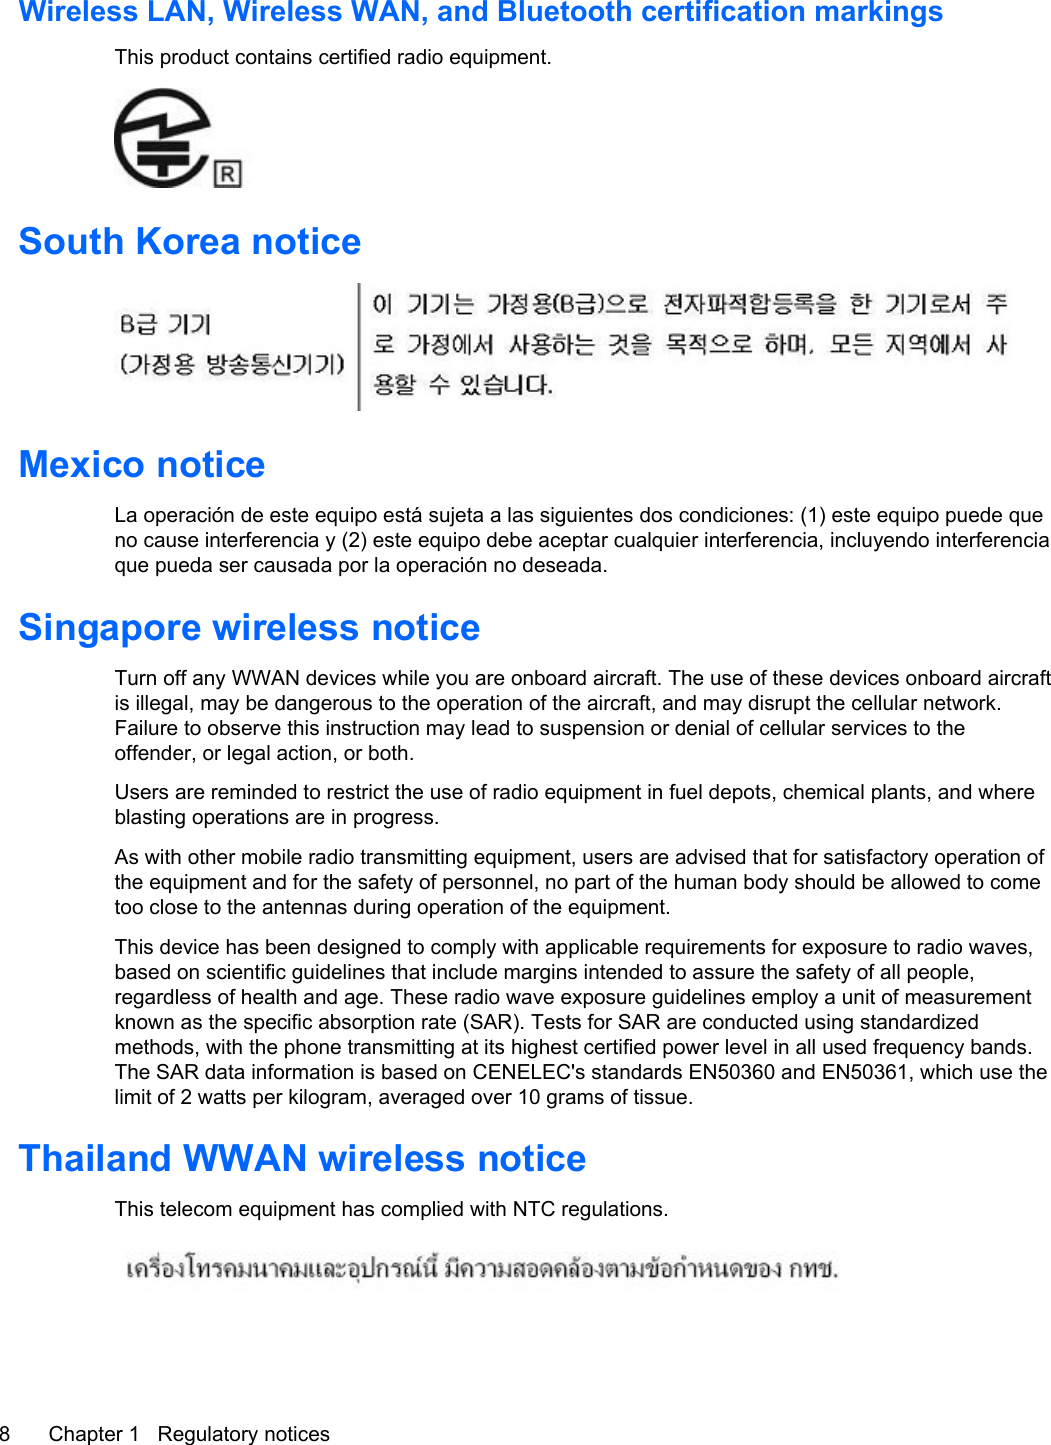 Wireless LAN, Wireless WAN, and Bluetooth certification markingsThis product contains certified radio equipment.South Korea noticeMexico noticeLa operación de este equipo está sujeta a las siguientes dos condiciones: (1) este equipo puede queno cause interferencia y (2) este equipo debe aceptar cualquier interferencia, incluyendo interferenciaque pueda ser causada por la operación no deseada.Singapore wireless noticeTurn off any WWAN devices while you are onboard aircraft. The use of these devices onboard aircraftis illegal, may be dangerous to the operation of the aircraft, and may disrupt the cellular network.Failure to observe this instruction may lead to suspension or denial of cellular services to theoffender, or legal action, or both.Users are reminded to restrict the use of radio equipment in fuel depots, chemical plants, and whereblasting operations are in progress.As with other mobile radio transmitting equipment, users are advised that for satisfactory operation ofthe equipment and for the safety of personnel, no part of the human body should be allowed to cometoo close to the antennas during operation of the equipment.This device has been designed to comply with applicable requirements for exposure to radio waves,based on scientific guidelines that include margins intended to assure the safety of all people,regardless of health and age. These radio wave exposure guidelines employ a unit of measurementknown as the specific absorption rate (SAR). Tests for SAR are conducted using standardizedmethods, with the phone transmitting at its highest certified power level in all used frequency bands.The SAR data information is based on CENELEC&apos;s standards EN50360 and EN50361, which use thelimit of 2 watts per kilogram, averaged over 10 grams of tissue.Thailand WWAN wireless noticeThis telecom equipment has complied with NTC regulations.8 Chapter 1   Regulatory notices